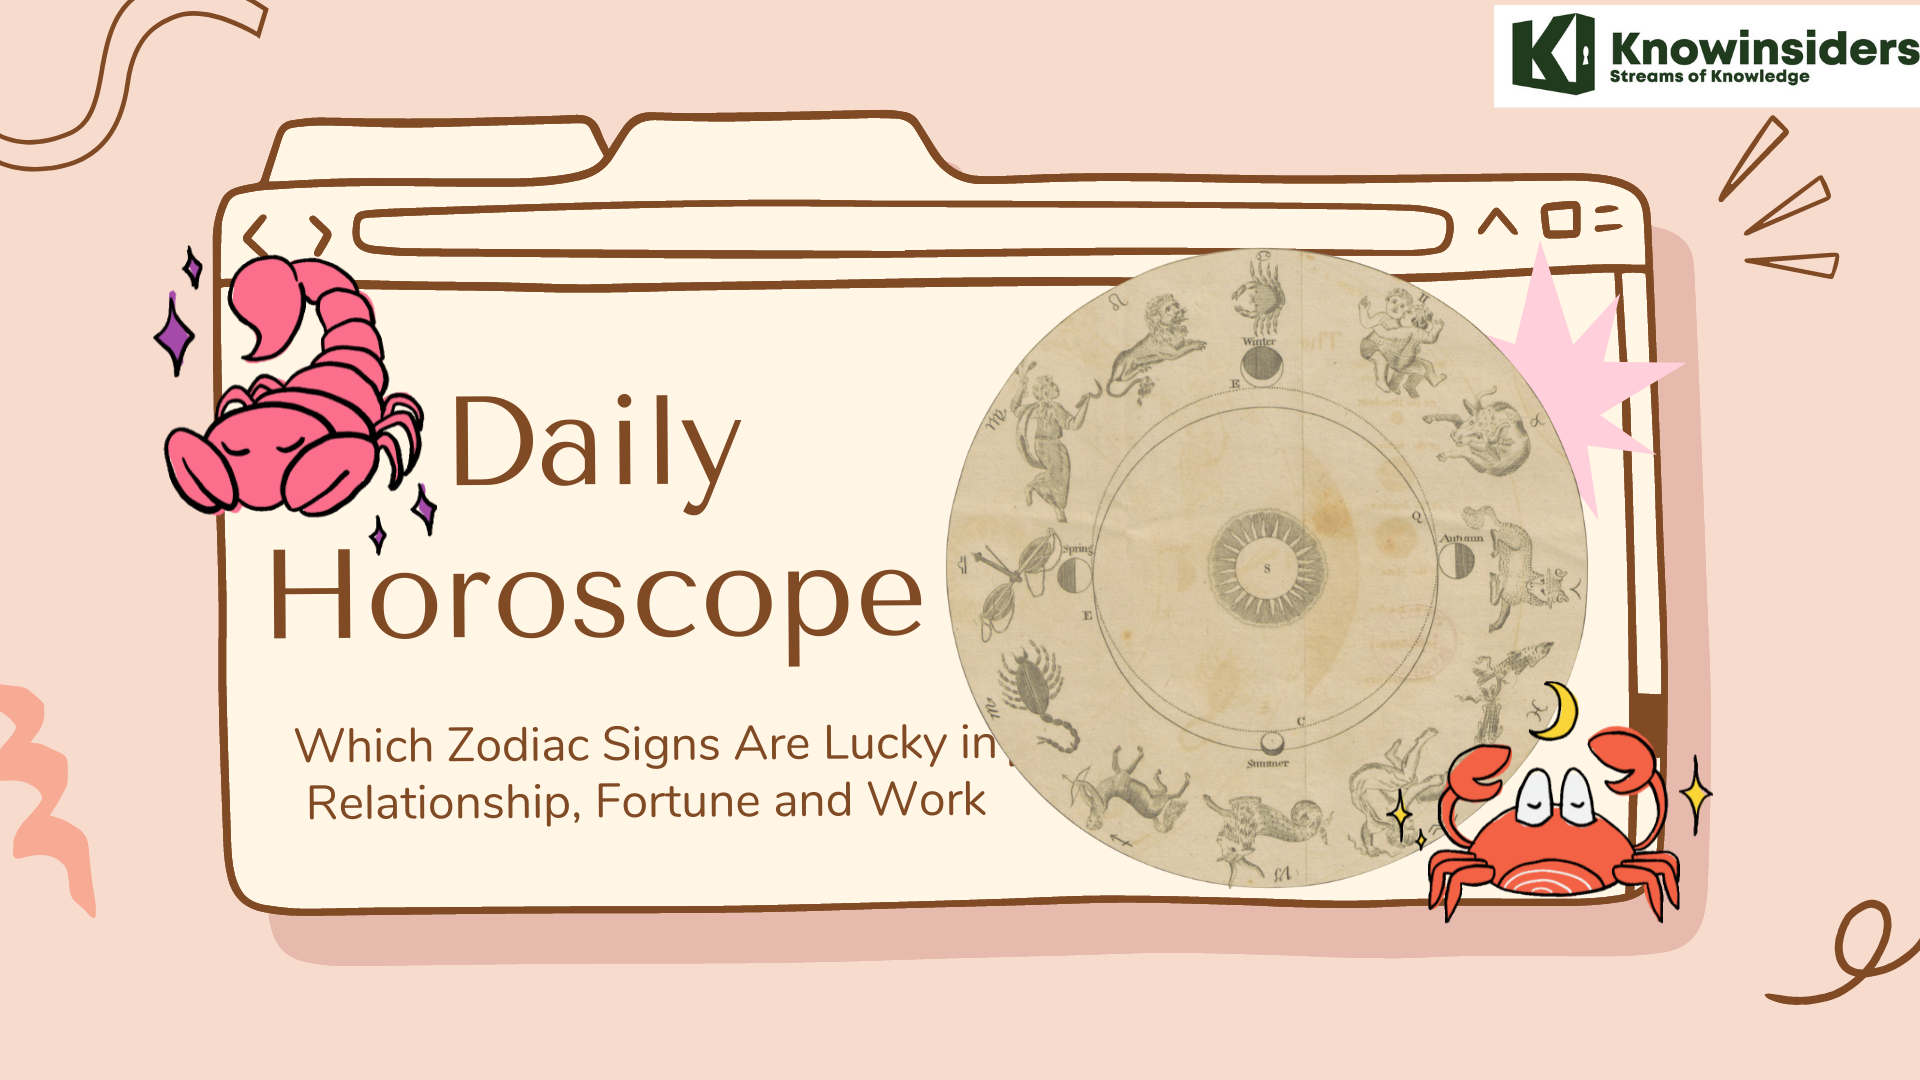 Daily Horoscope (June 15, 2022): Top Zodiac Signs Are Lucky in Love, Fortune and Career